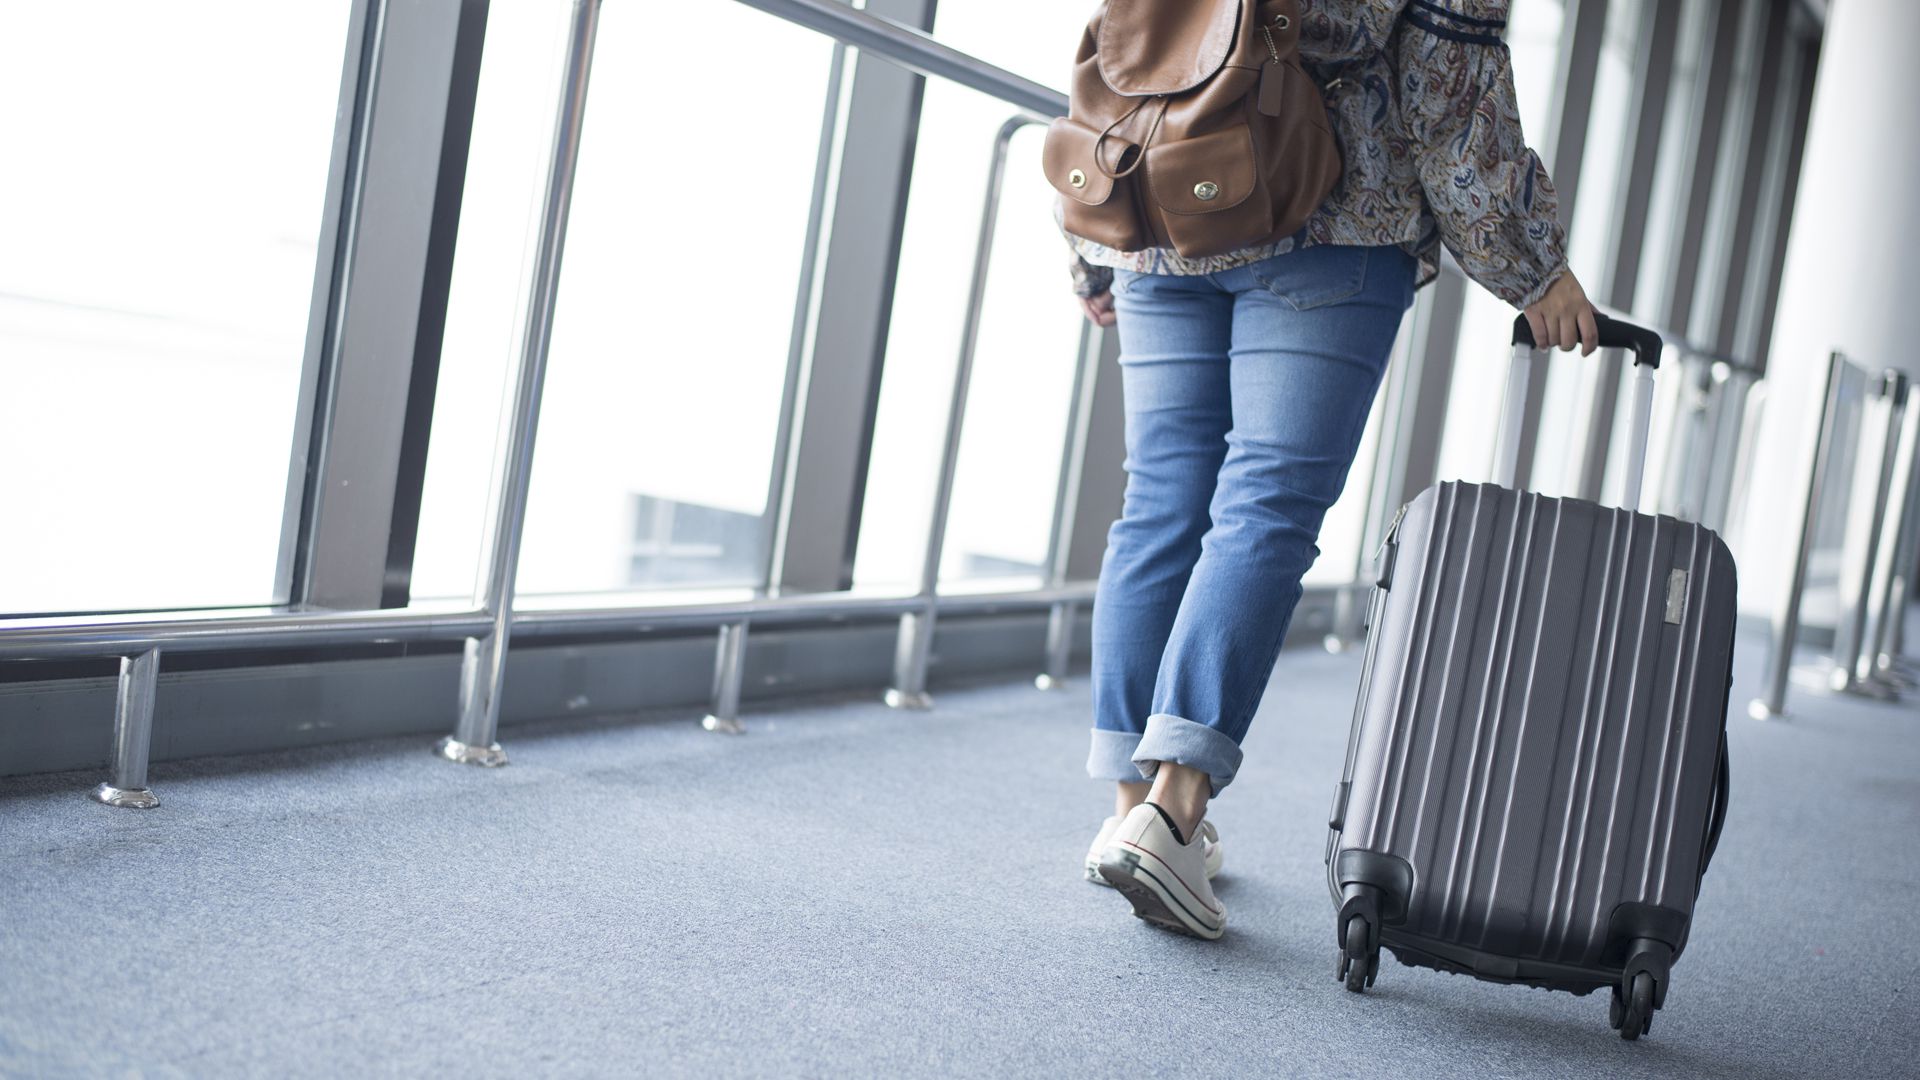 Every traveler needs to know what items could cause problems if they are included in their hand luggage.